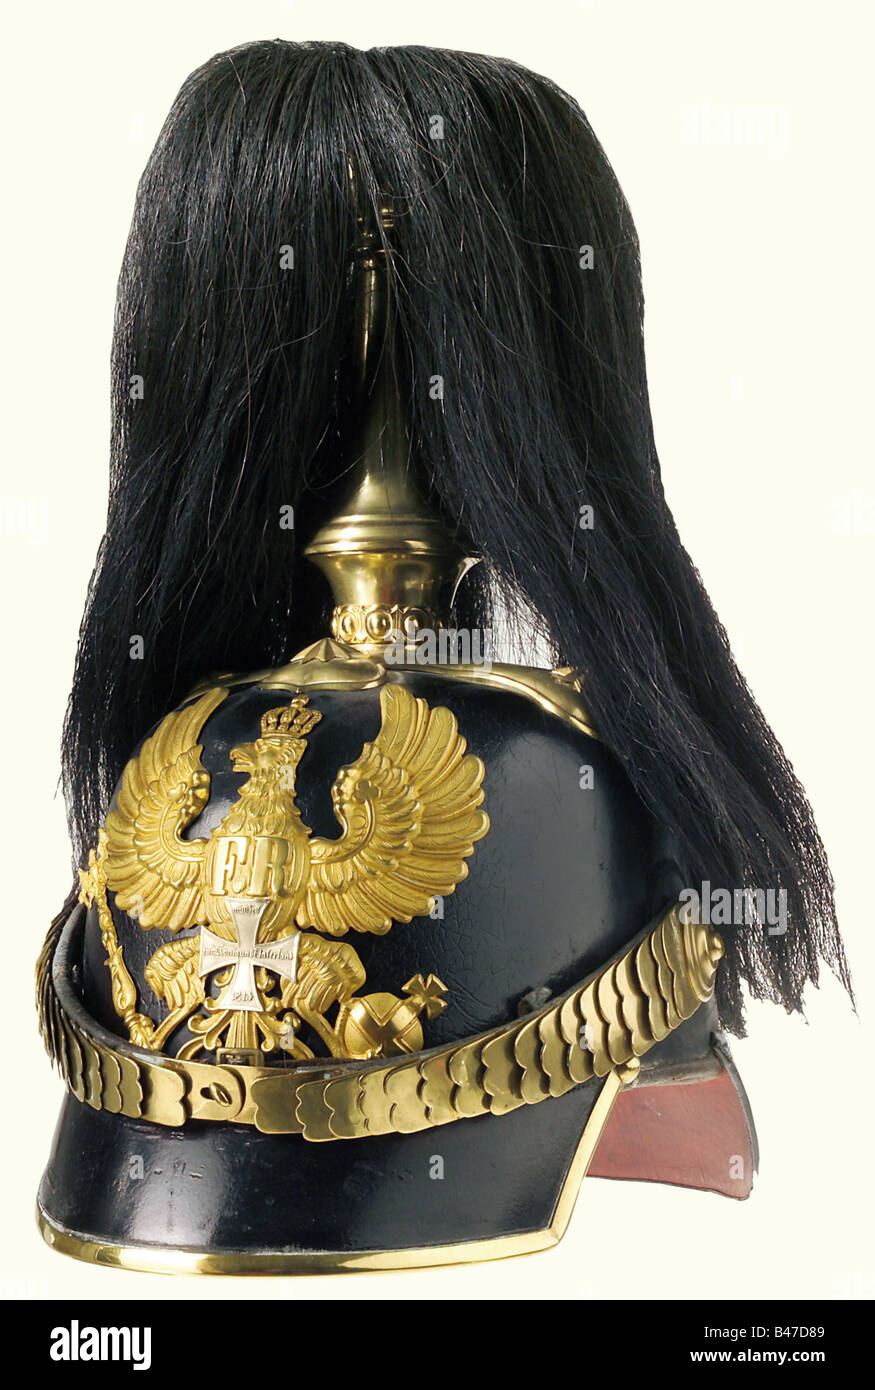 Prussia: A helmet of 1860 pattern for reserve officers, of the infantry. A well-preserved leather skull, with two assymetrically placed holes underneath the plate, and a slight dent on the rear peak. Gilt brass mountings, a plume holder with a black parade horsehair plume, and a frosted gilt plate overlaid with a reserve cross. Flat chinscales, and an officers' pattern state cockade on the right side. Red leather liner with slight traces of wear. Size 56. historic, historical, 19th century, object, objects, stills, clipping, clippings, cut out, cut-out, cut-out, Stock Photo